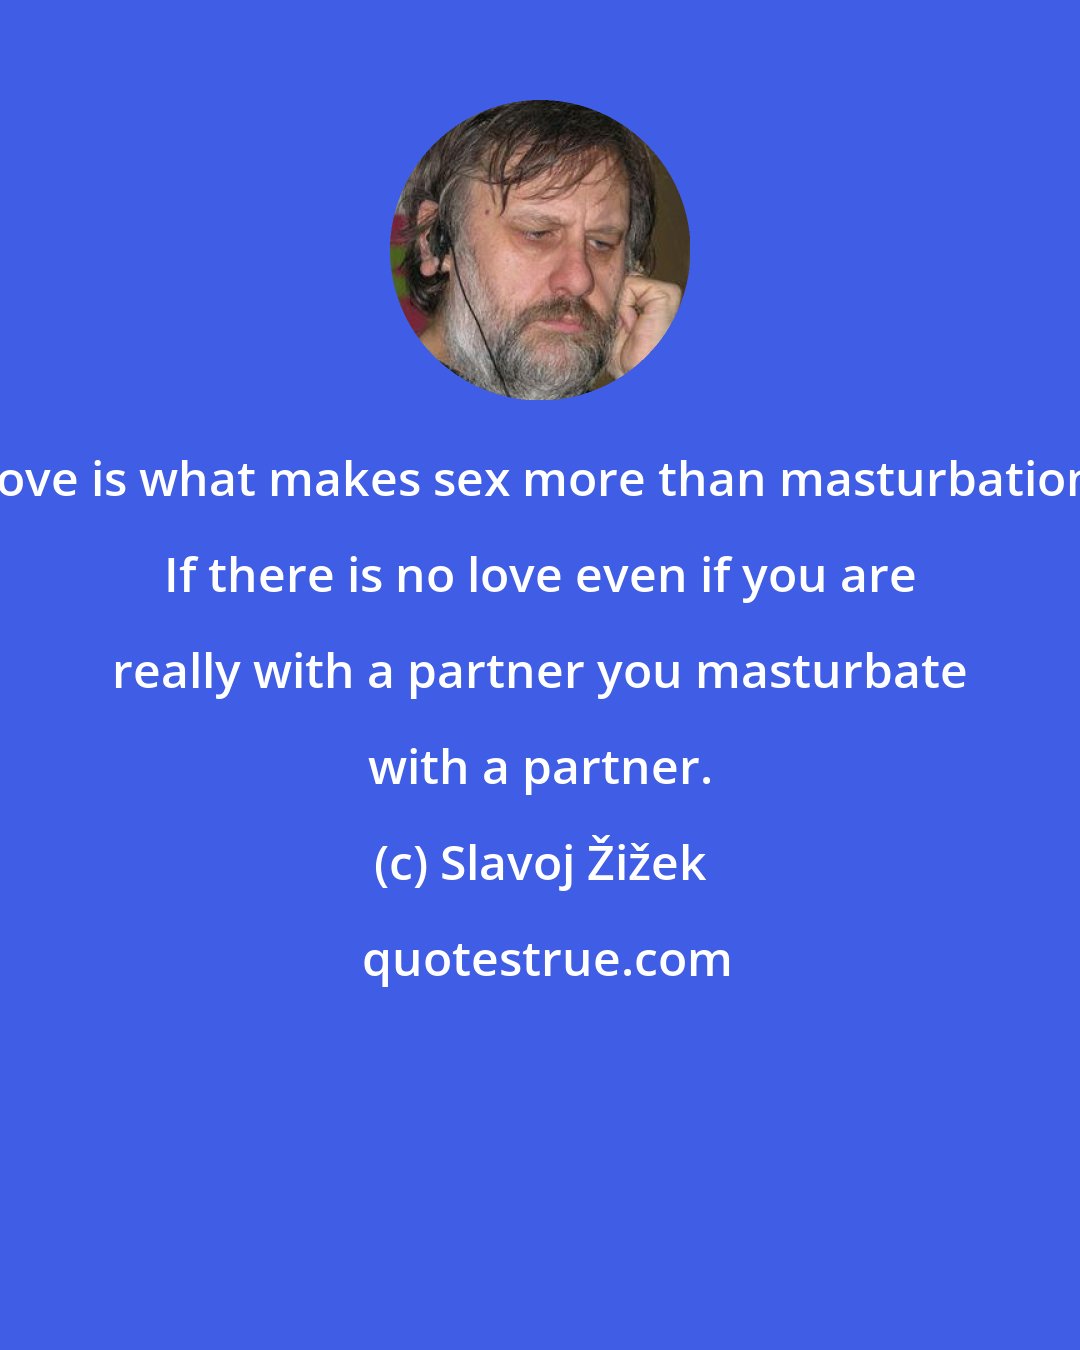 Slavoj Žižek: Love is what makes sex more than masturbation. If there is no love even if you are really with a partner you masturbate with a partner.